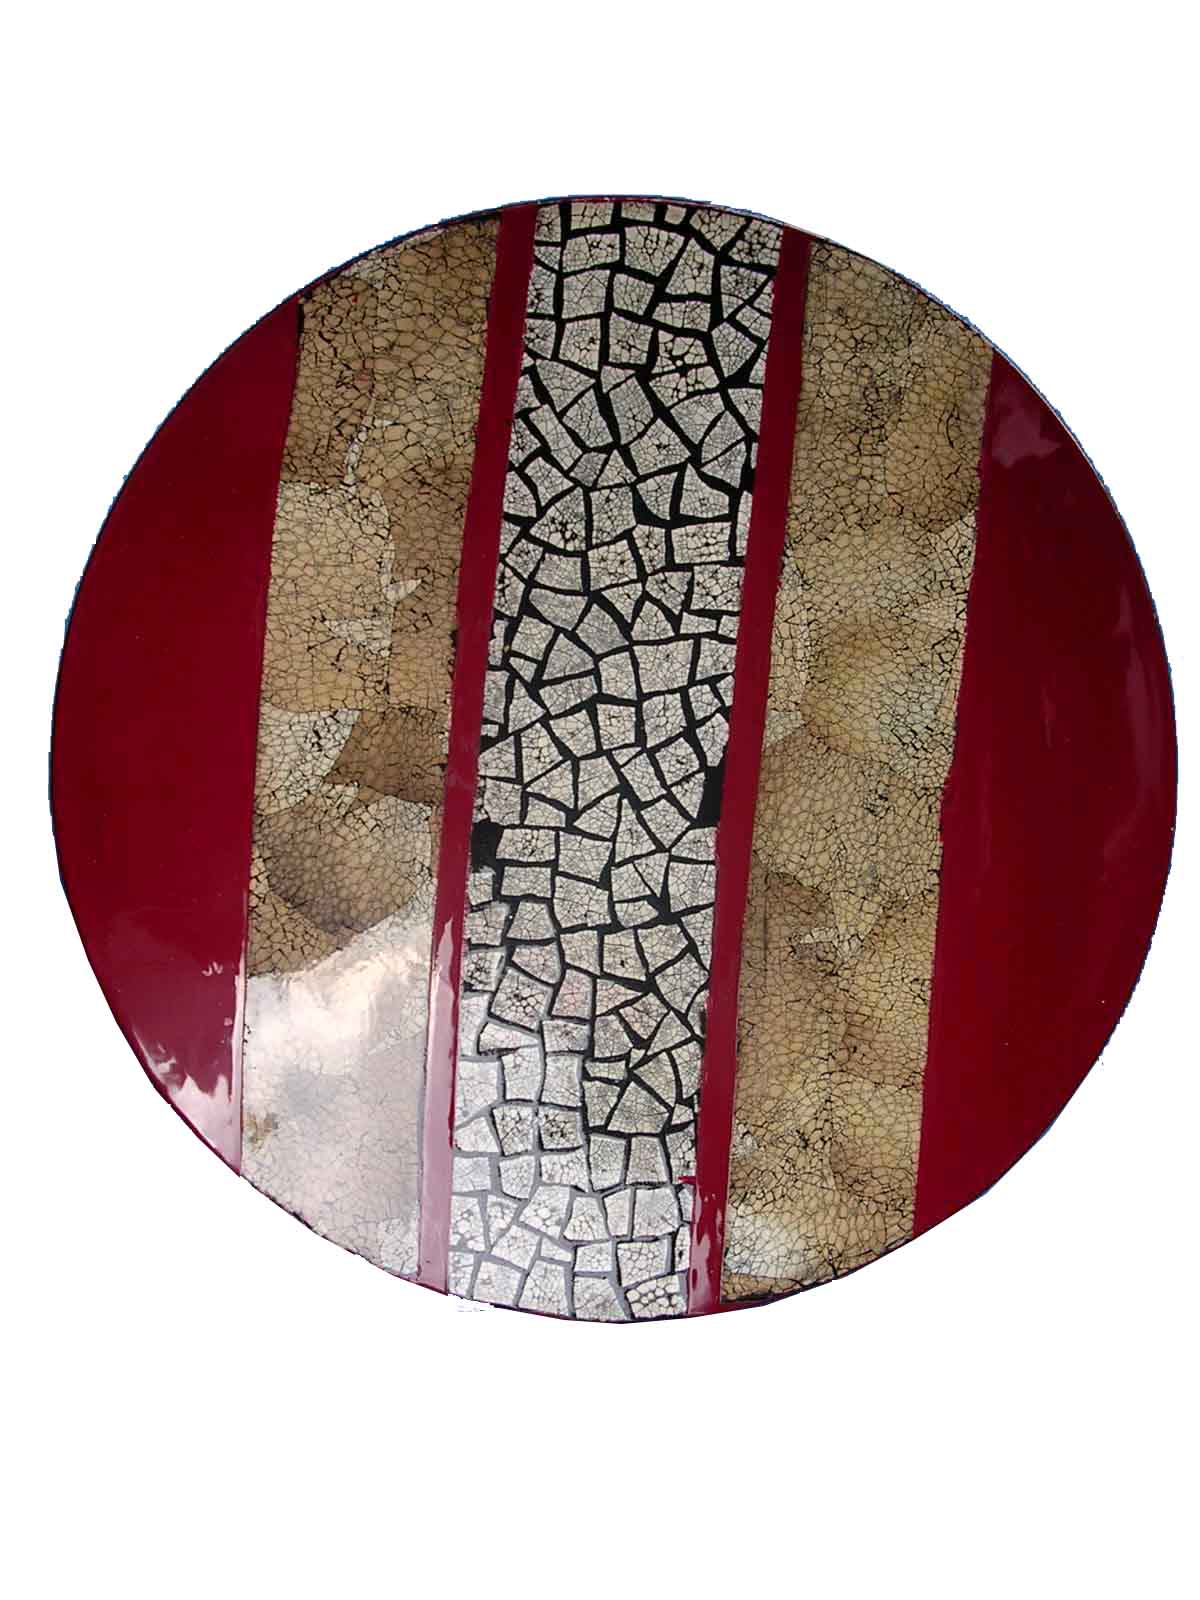 Lacquer Dish Decorated With Egg-Shell Finishing